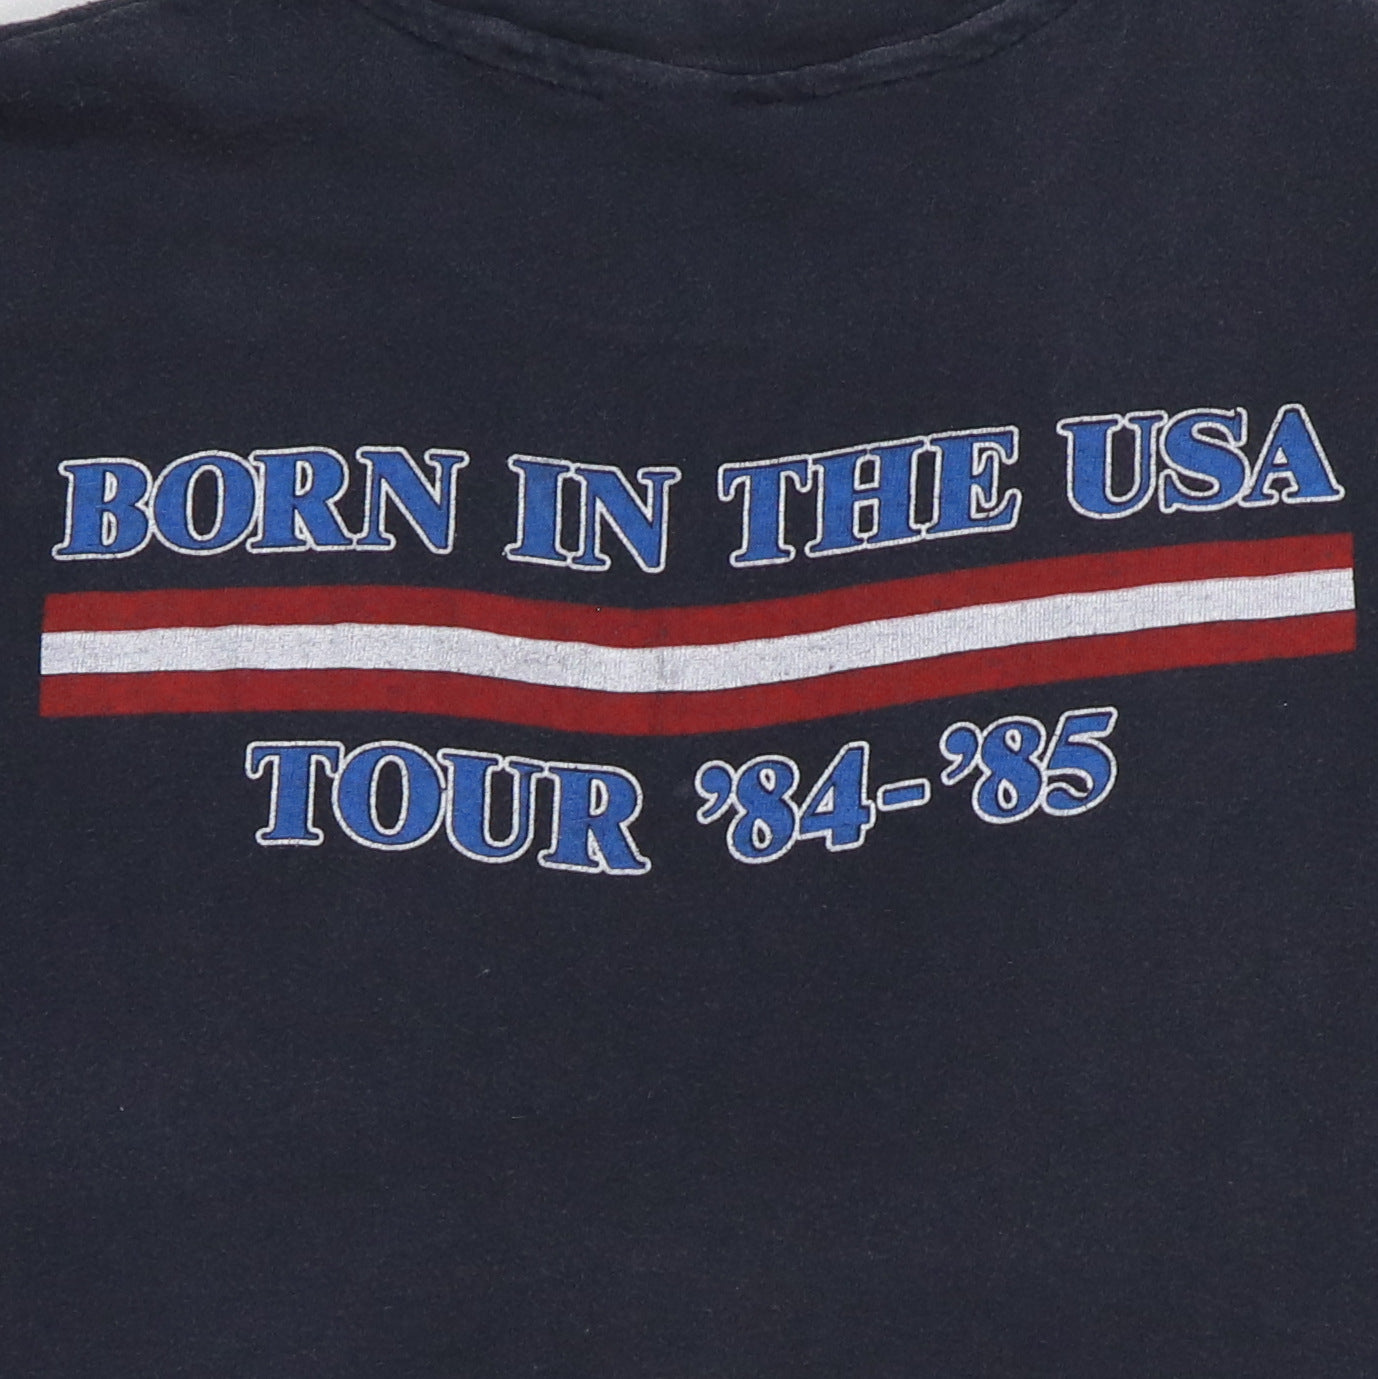 1984 Bruce Springsteen Born In The Usa Tour Shirt